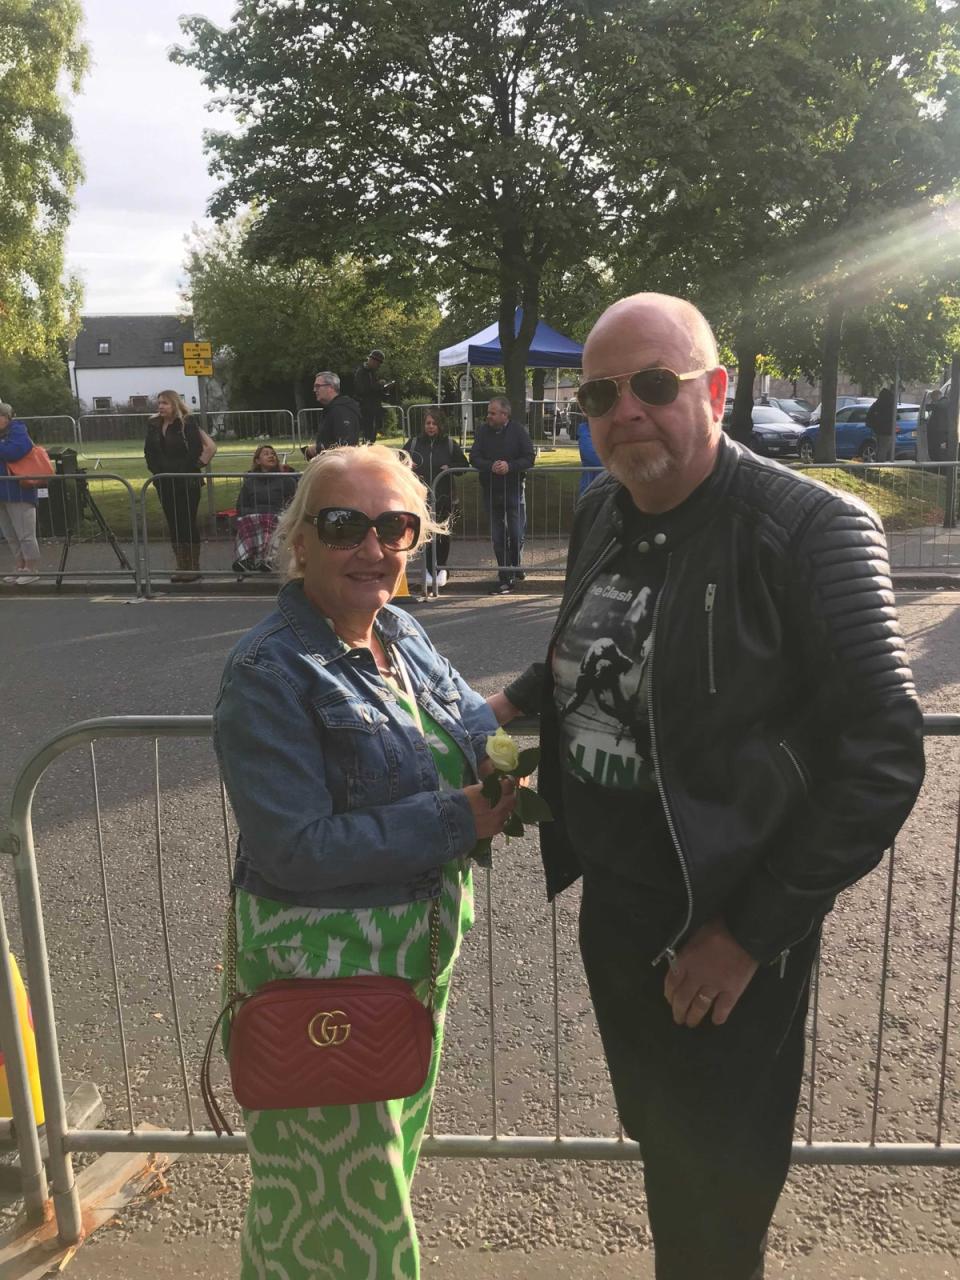 Colin and Patricia Dunmore had travelled to Ballater from Liverpool (Holly Bancroft)